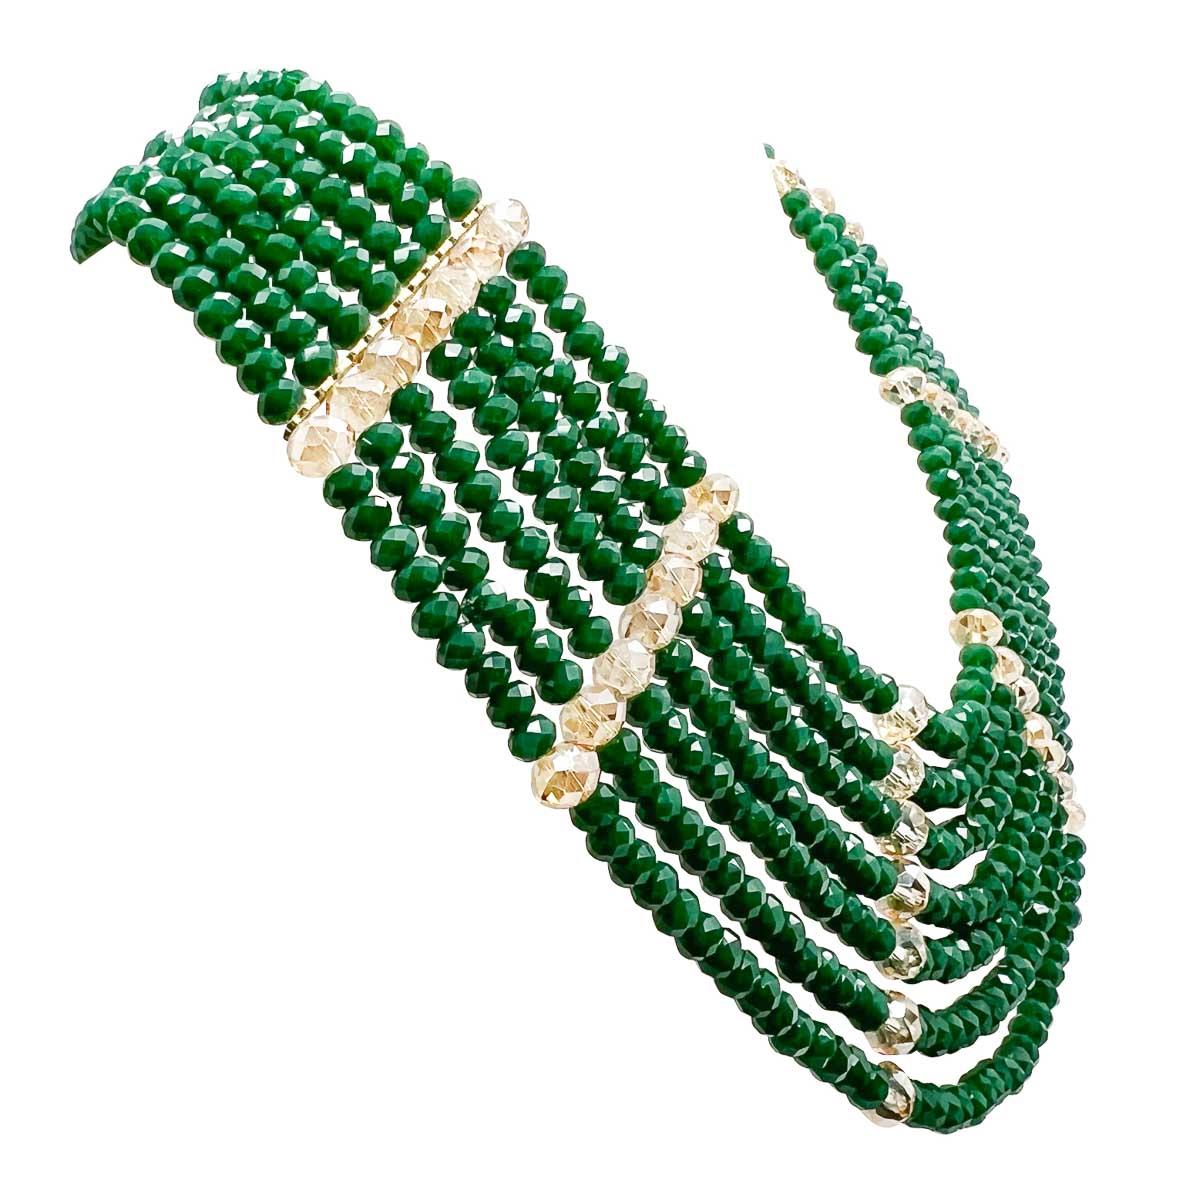 A stunning Vintage Faceted Crystal Bib from the 1960s. Seven luxurious rows of faceted beads in a deep green agate colour are accented to perfection with glistening champagne crystals. An incredible work of wearable art that carries style and